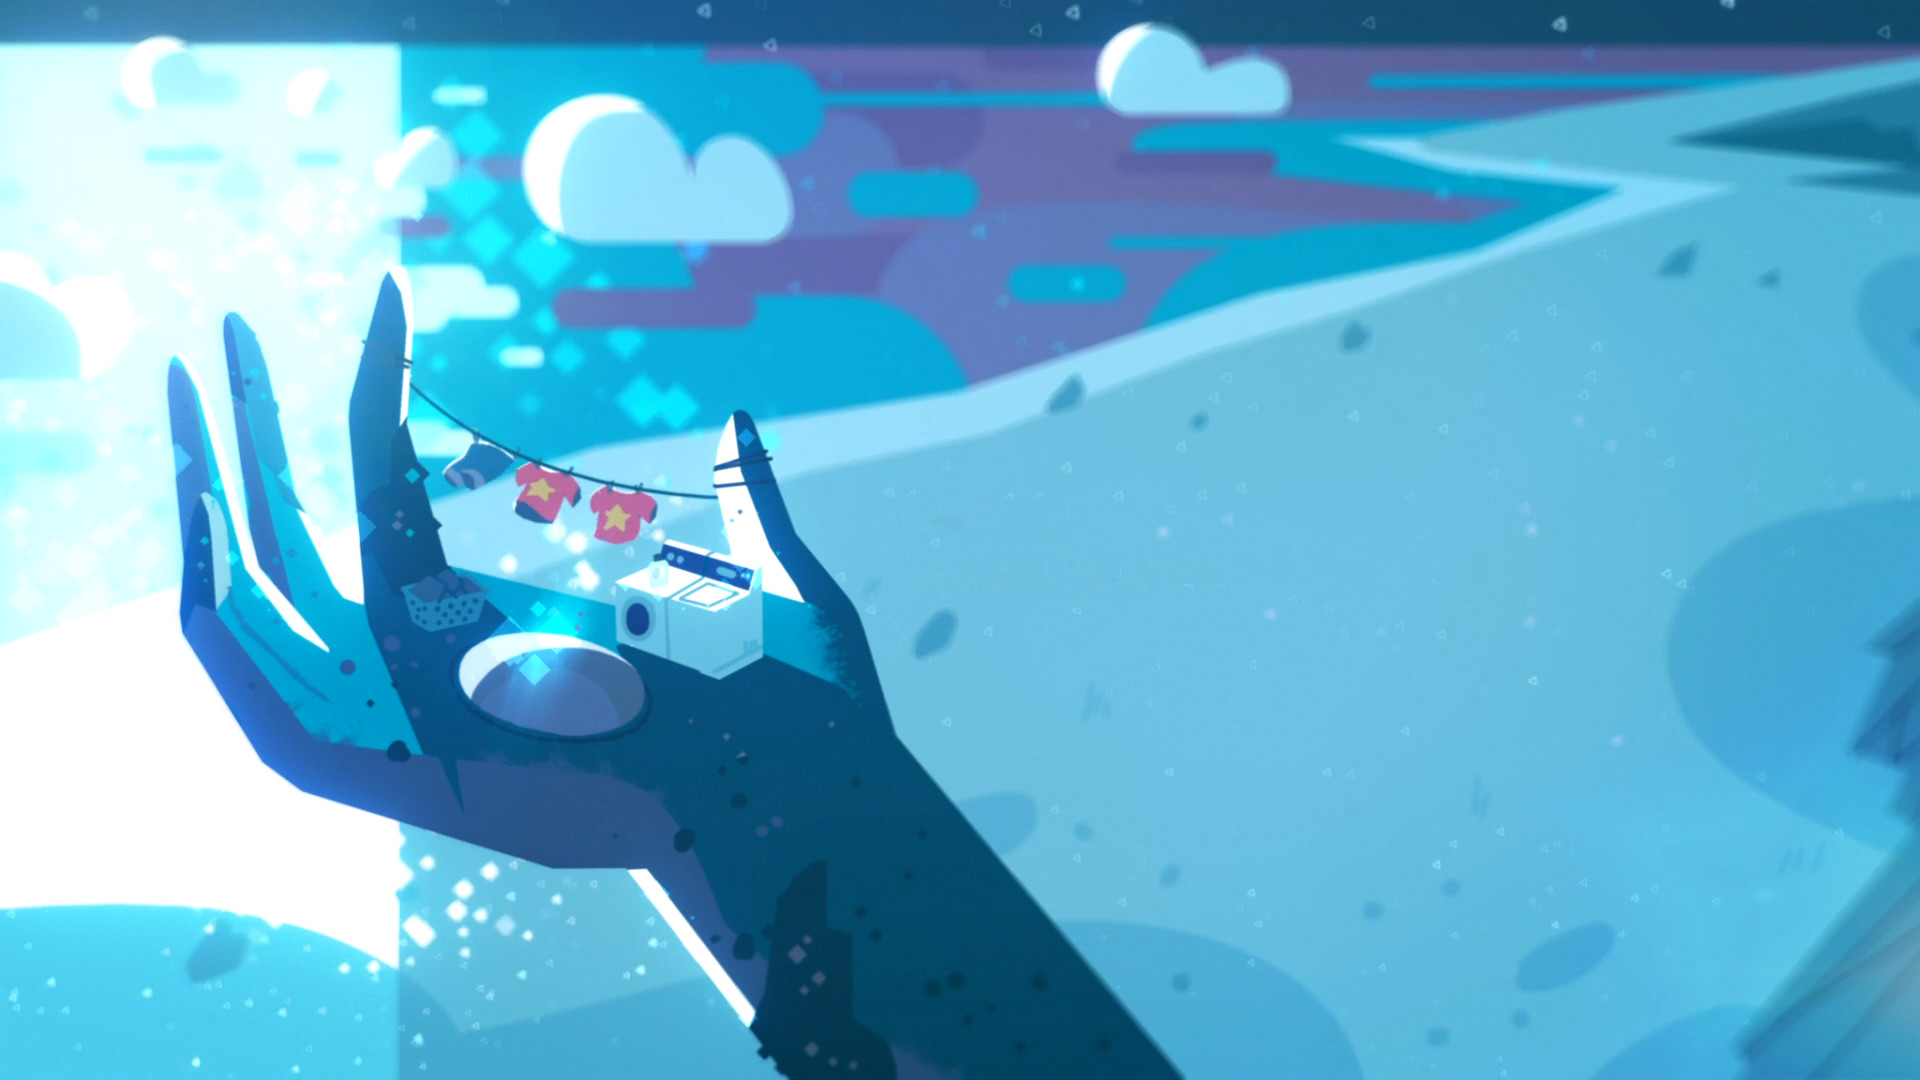 1920x1080 Explore More Wallpapers in the Steven Universe Subcategory!